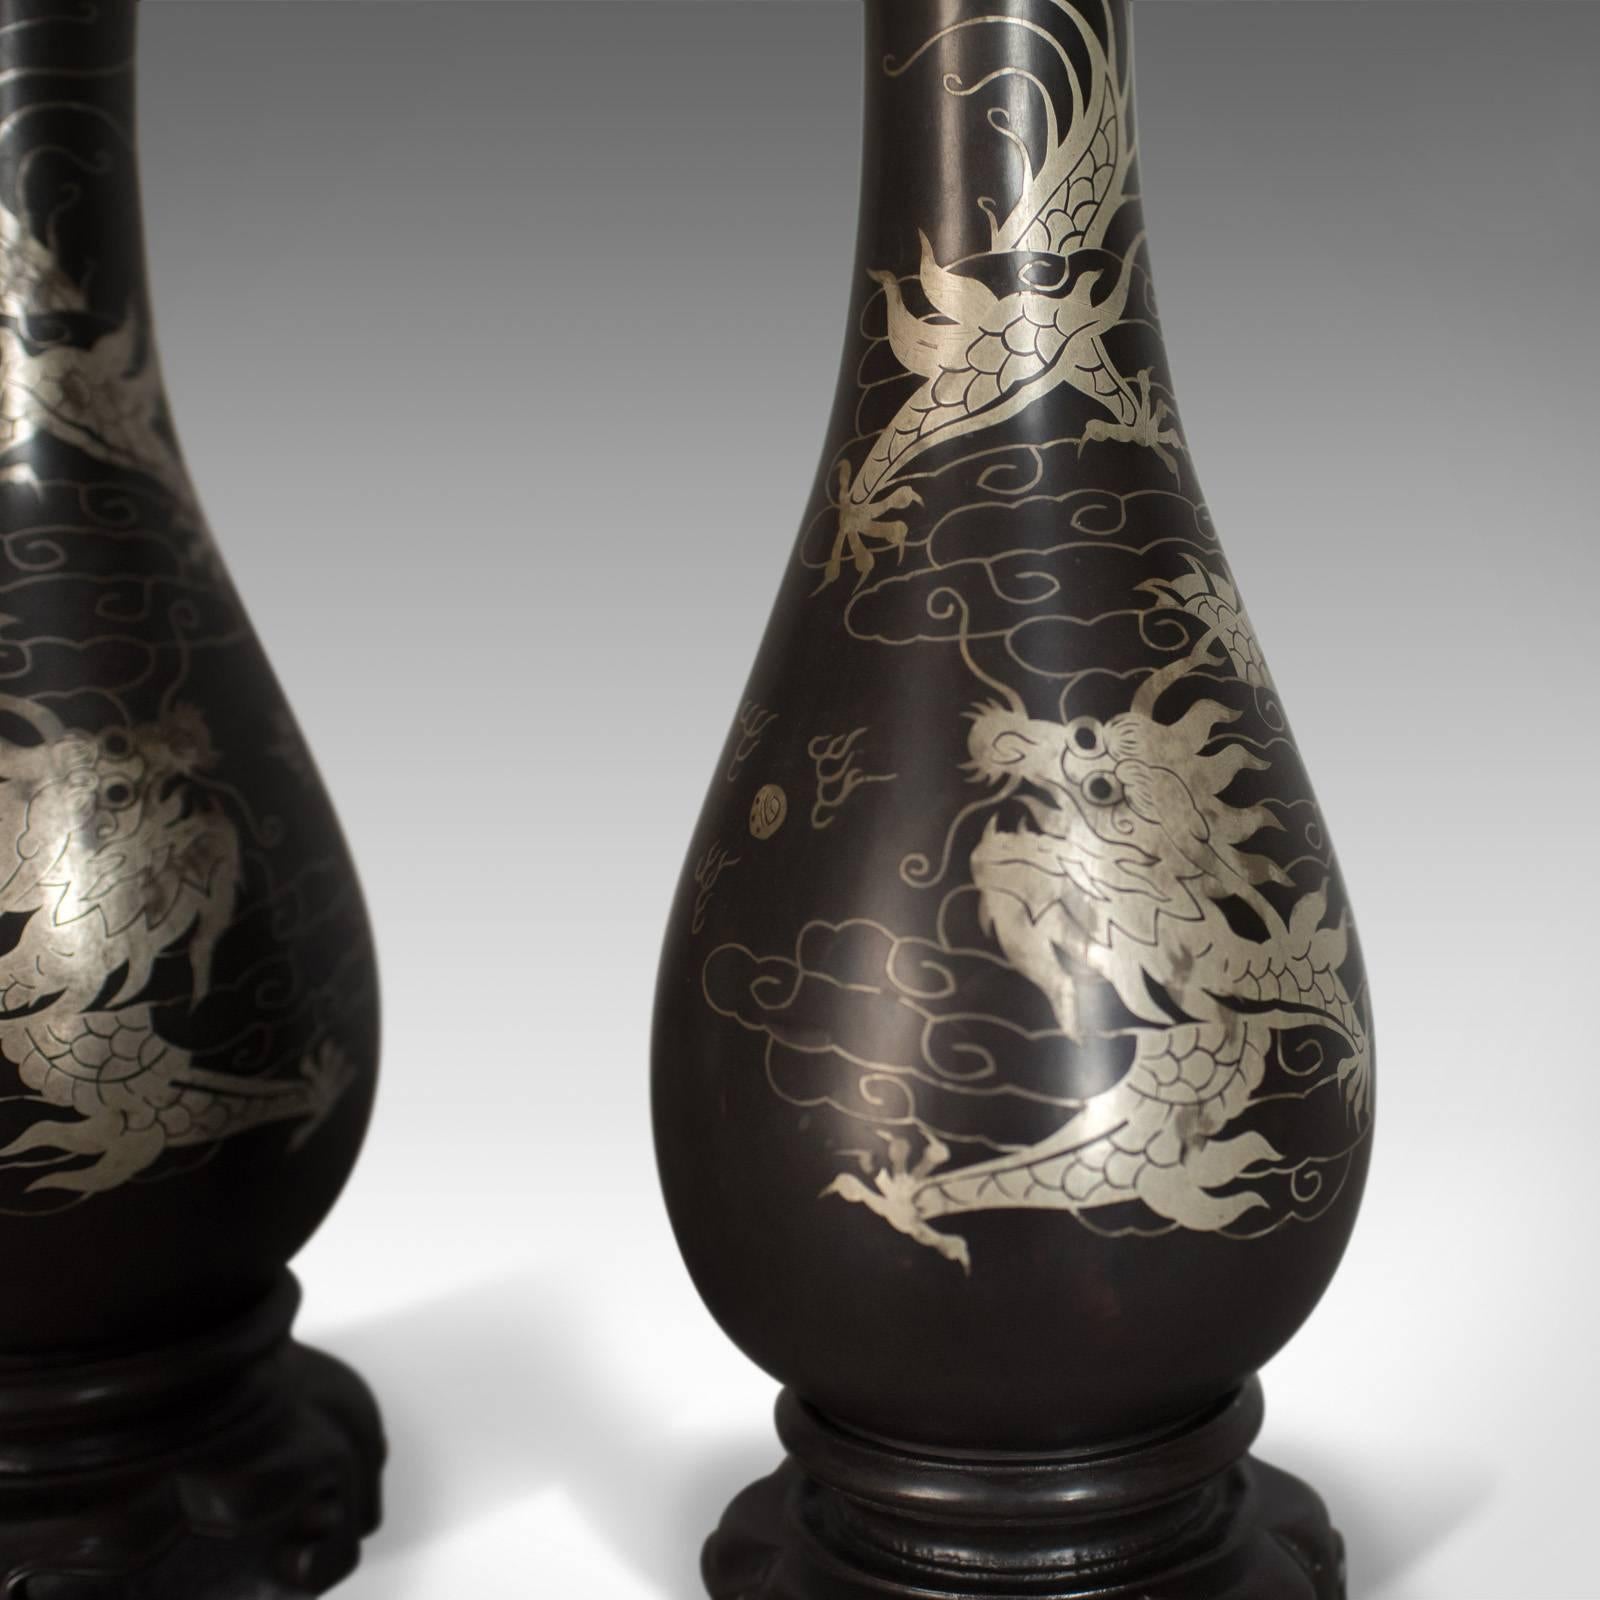 Chinese Export Vintage Pair of Lacquerware Vases, Chinese, 'Bodiless', Stem, Silver on Black